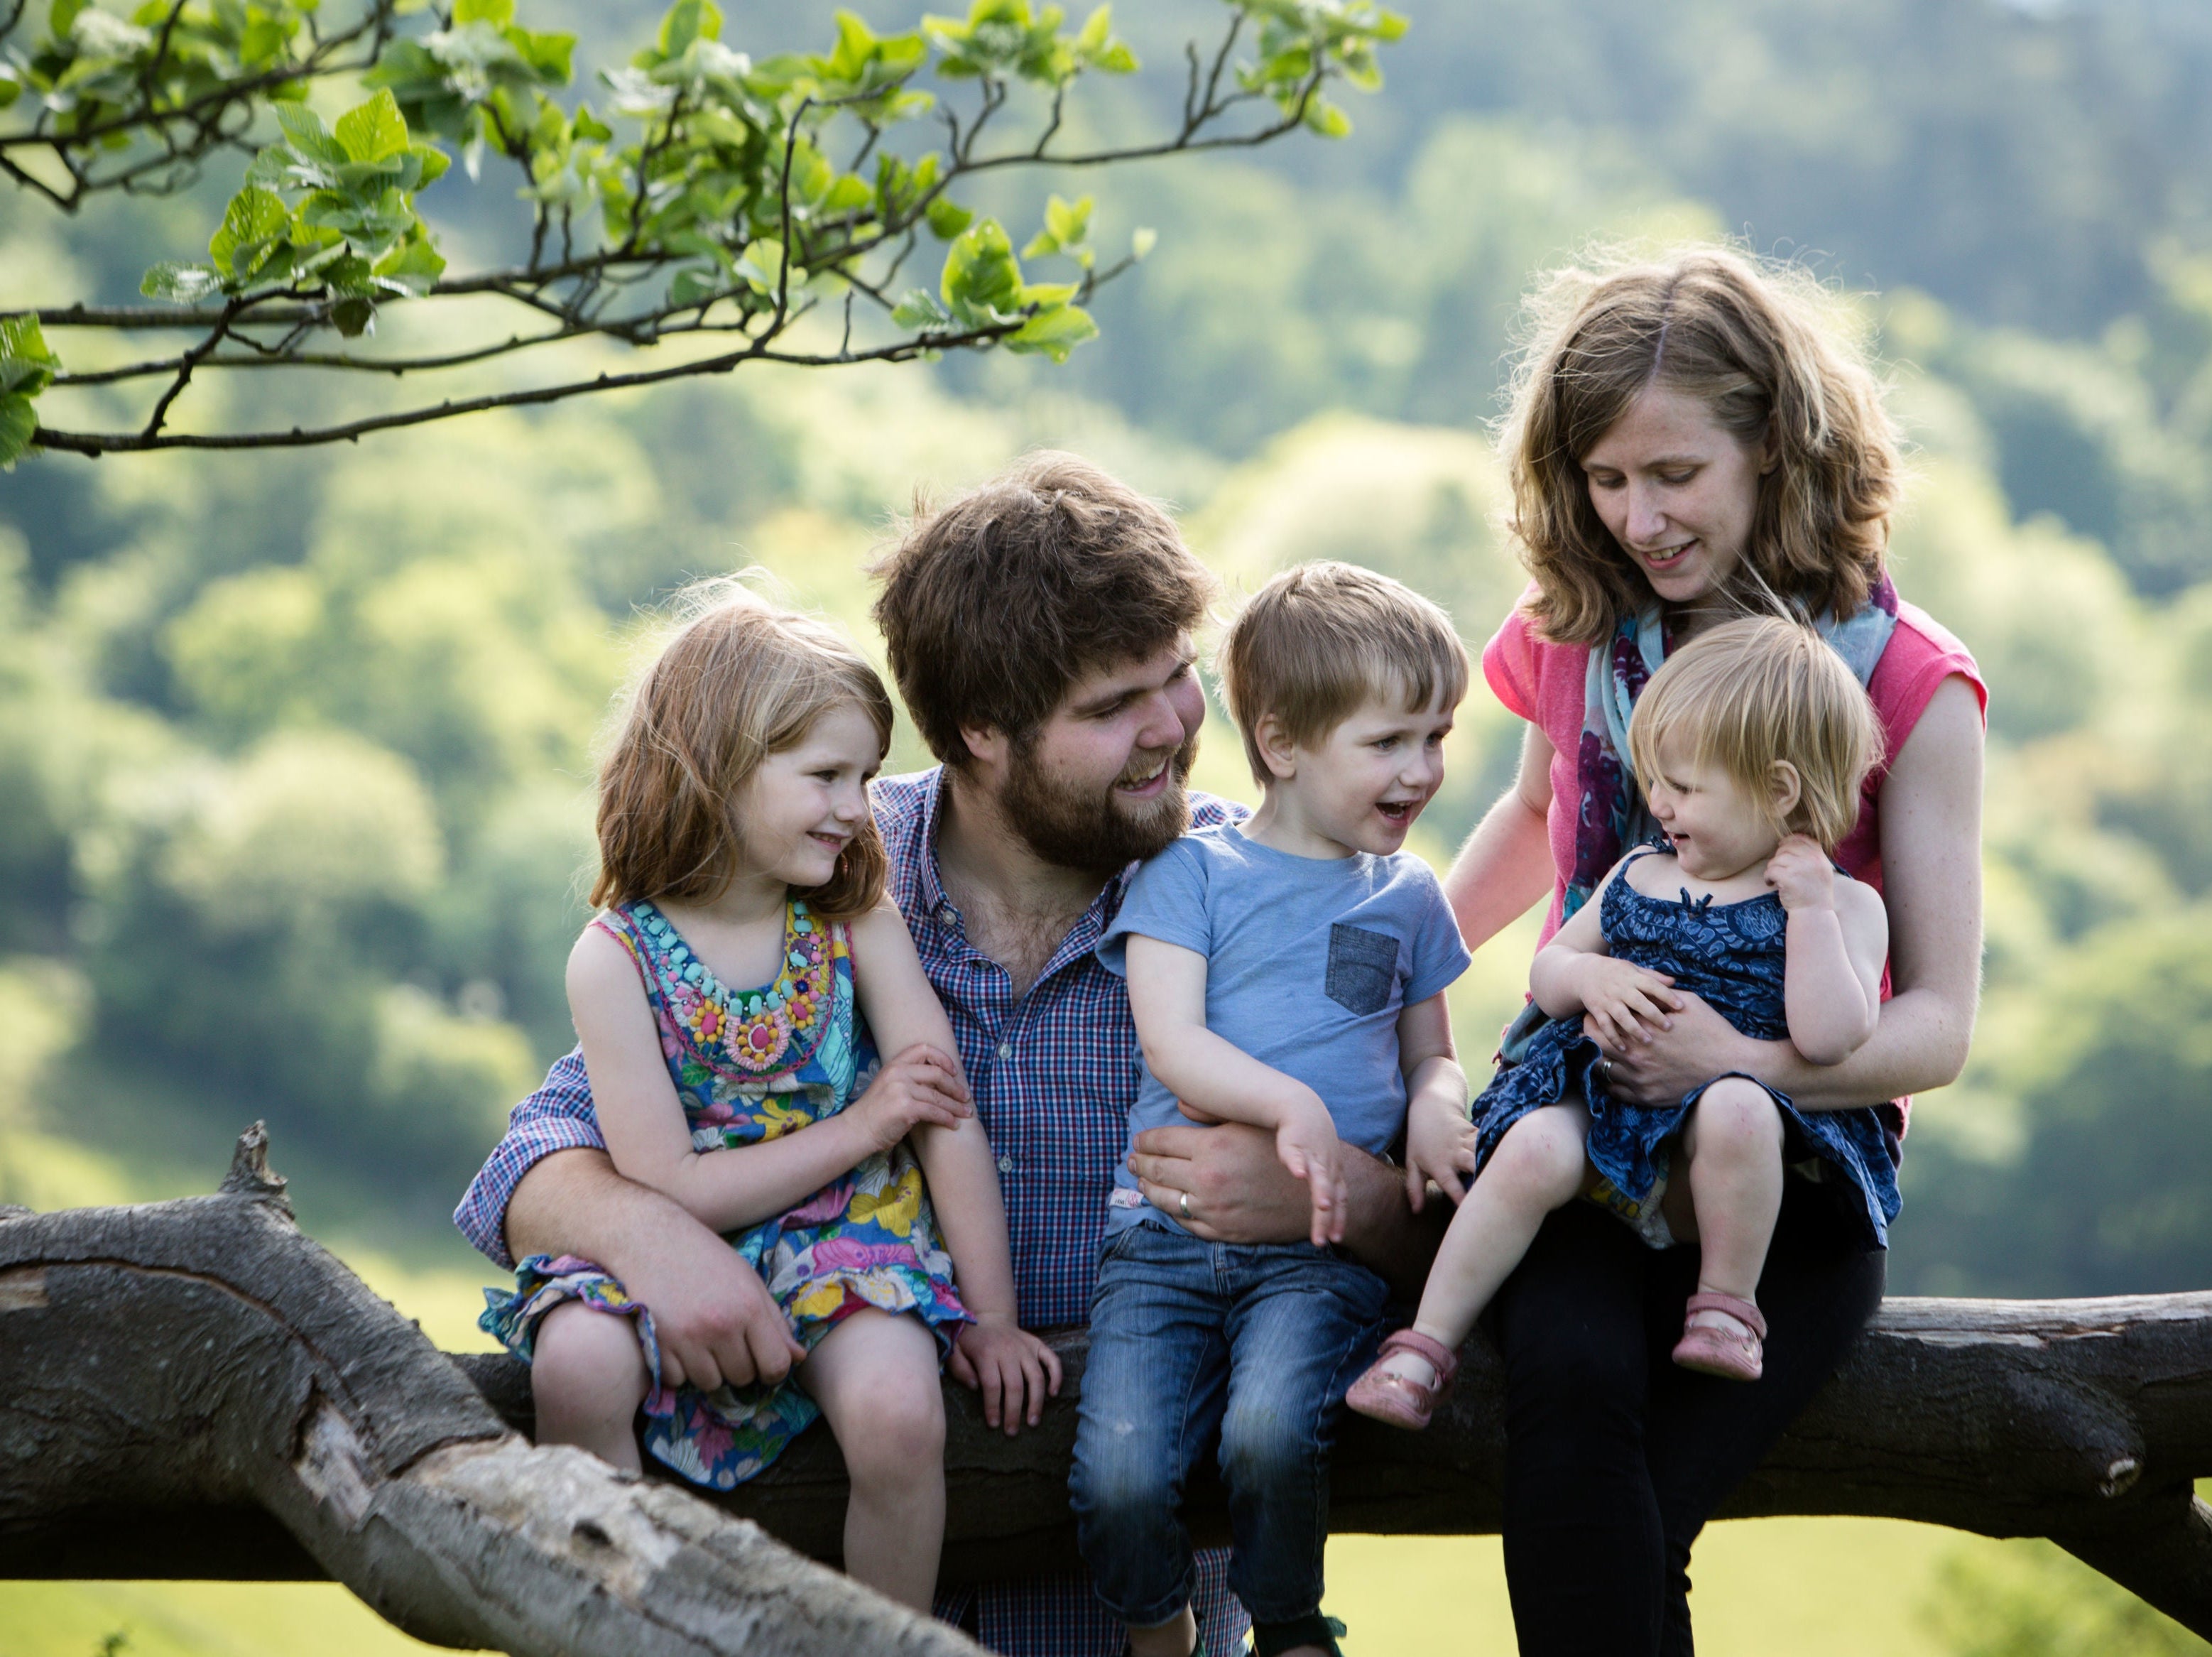 Zoe Powell, 29, with her husband Josh and their three children Phoebe, eight, Simeon, six, Amelia, four, who were involved in a crash on the A40 near Oxford.